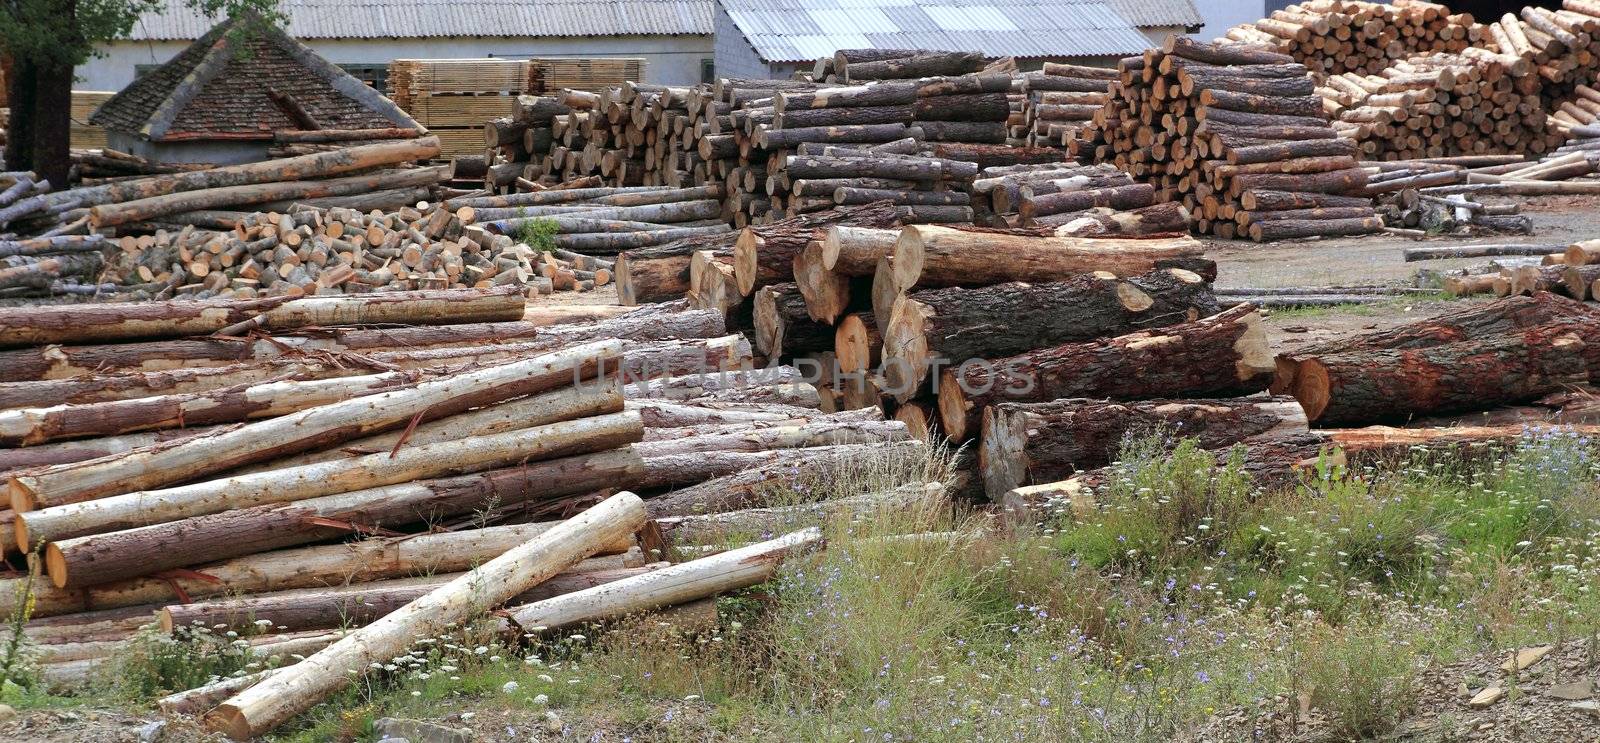 Logs timber industry trunks stacked outdoor stock